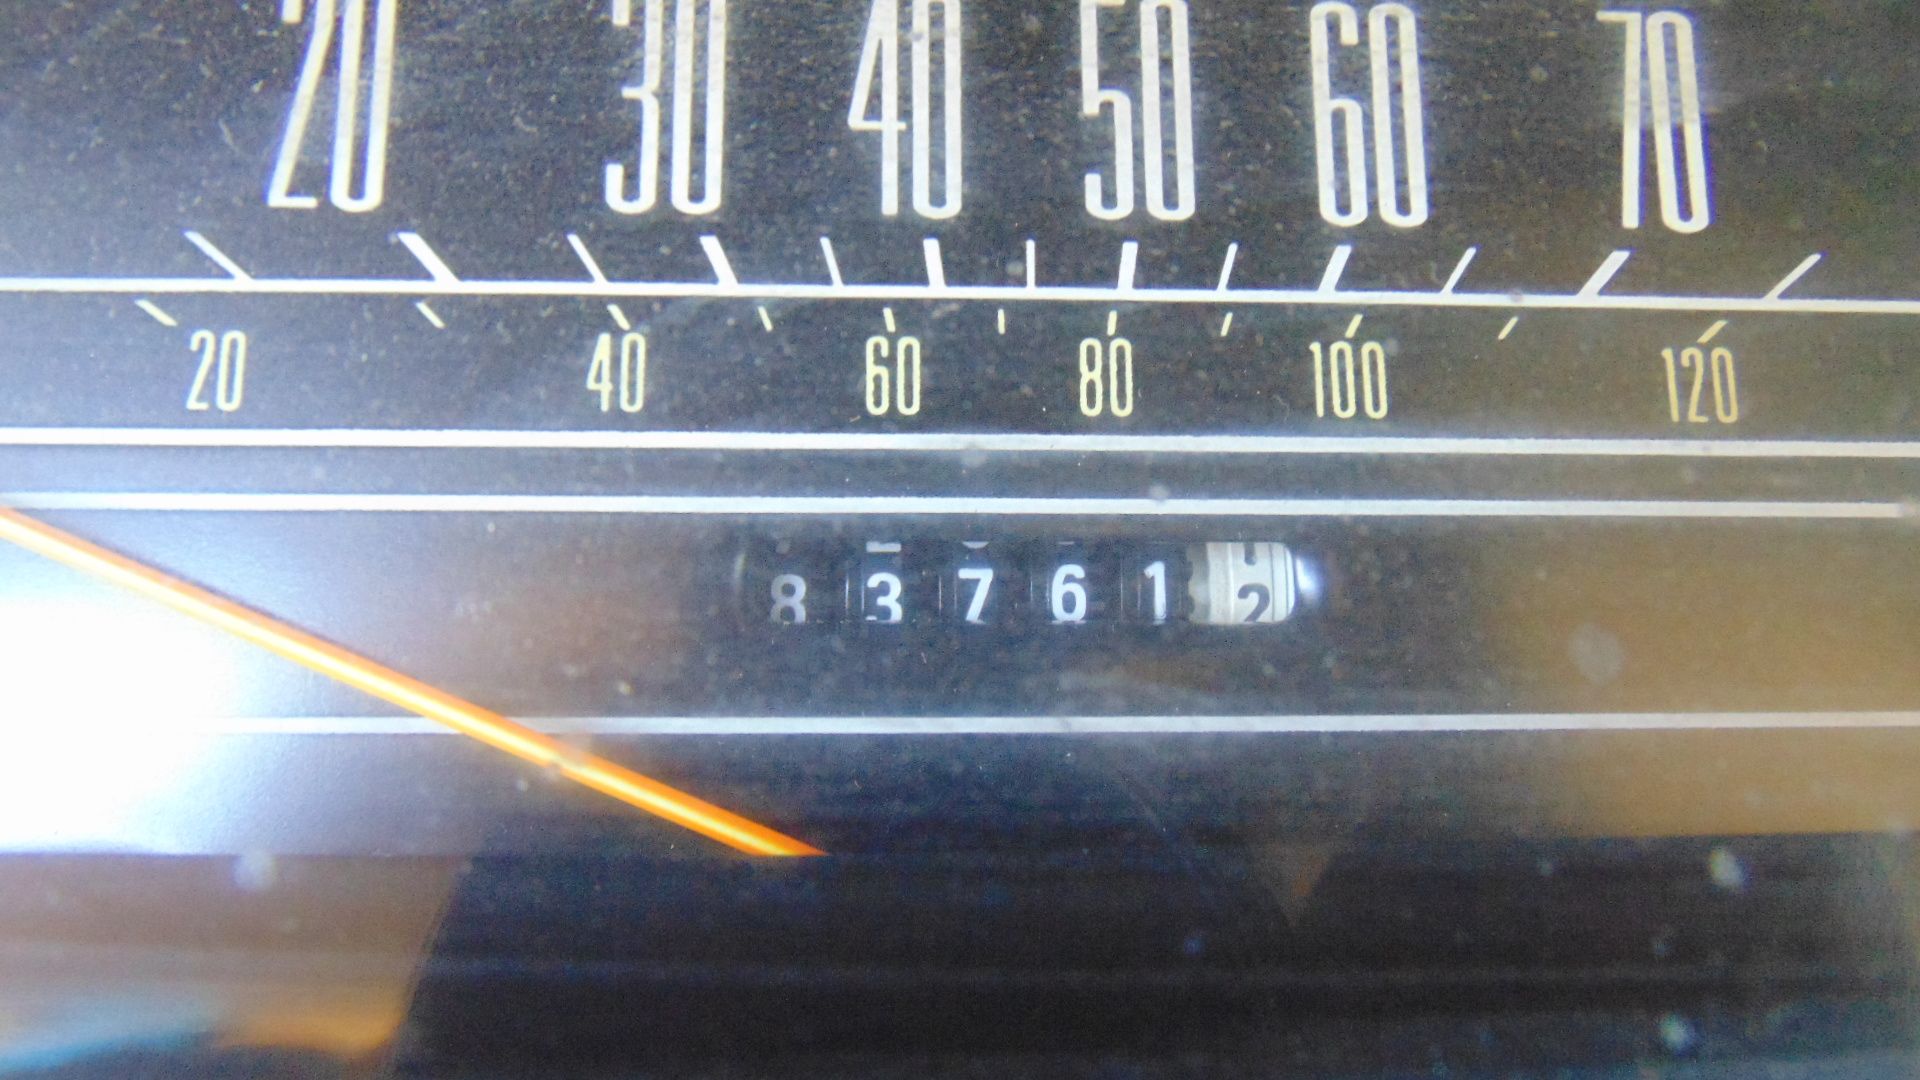 1978 MERCURY GRAND MARQUIS, ODOMETER READING 12,838, VIN. 8Z65S644505, 351M GAS, AUTO TRANS, FWD, CR - Image 9 of 13